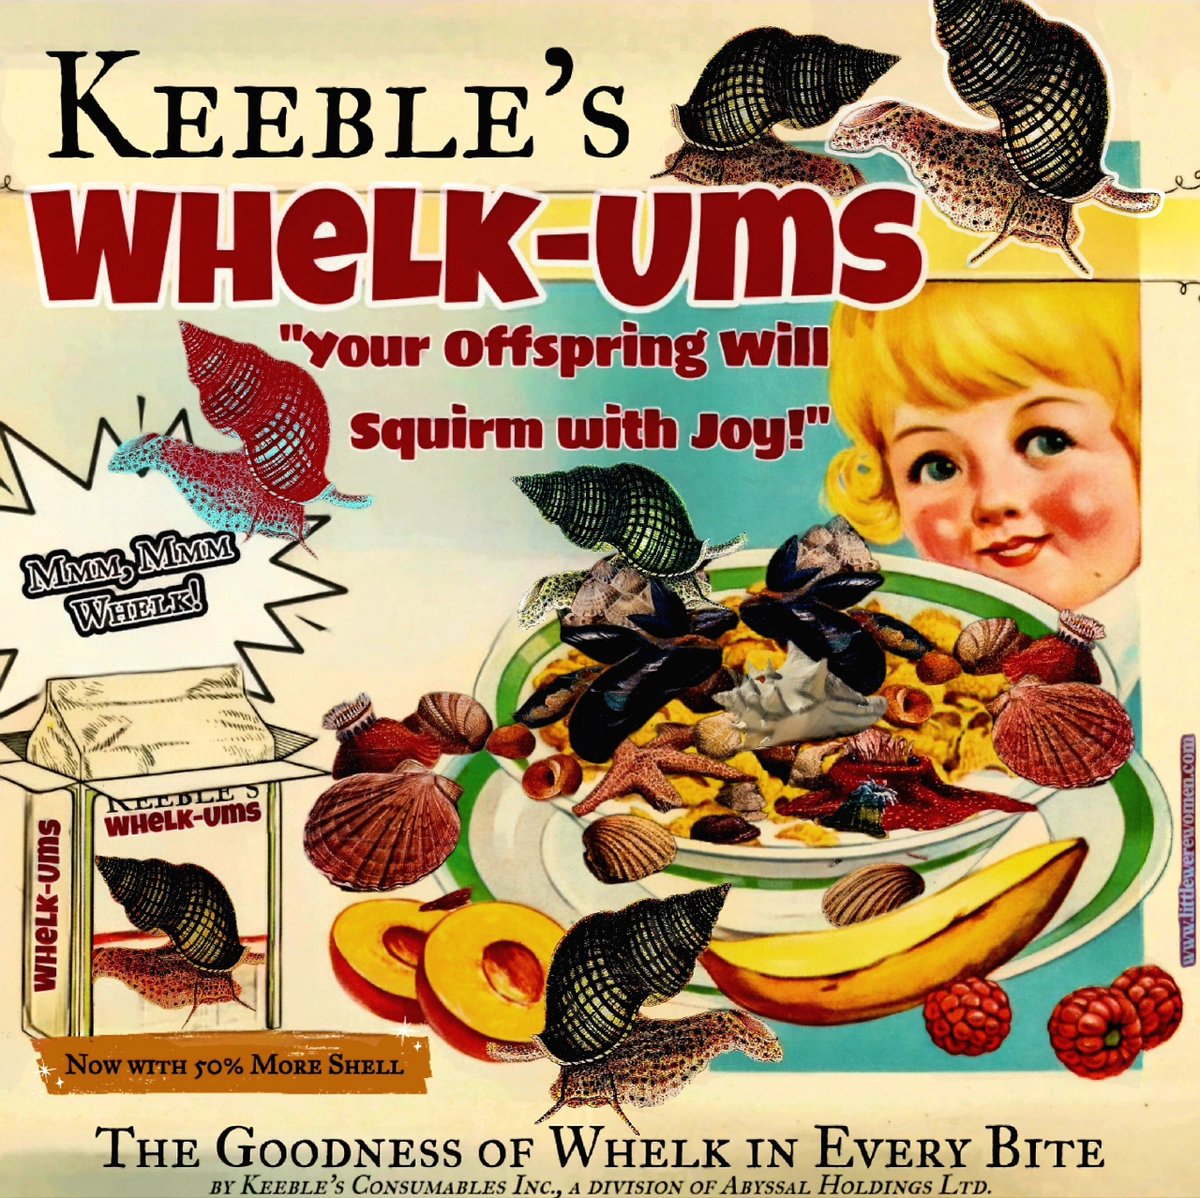 Keeble's Whelk-Ums -- try a big bowl before the earth is forever cleansed of the pestilence known as humanity!
>>Brought to you by Keeble's Consumables Corp., a division of Abyssal Holdings Ltd.<<